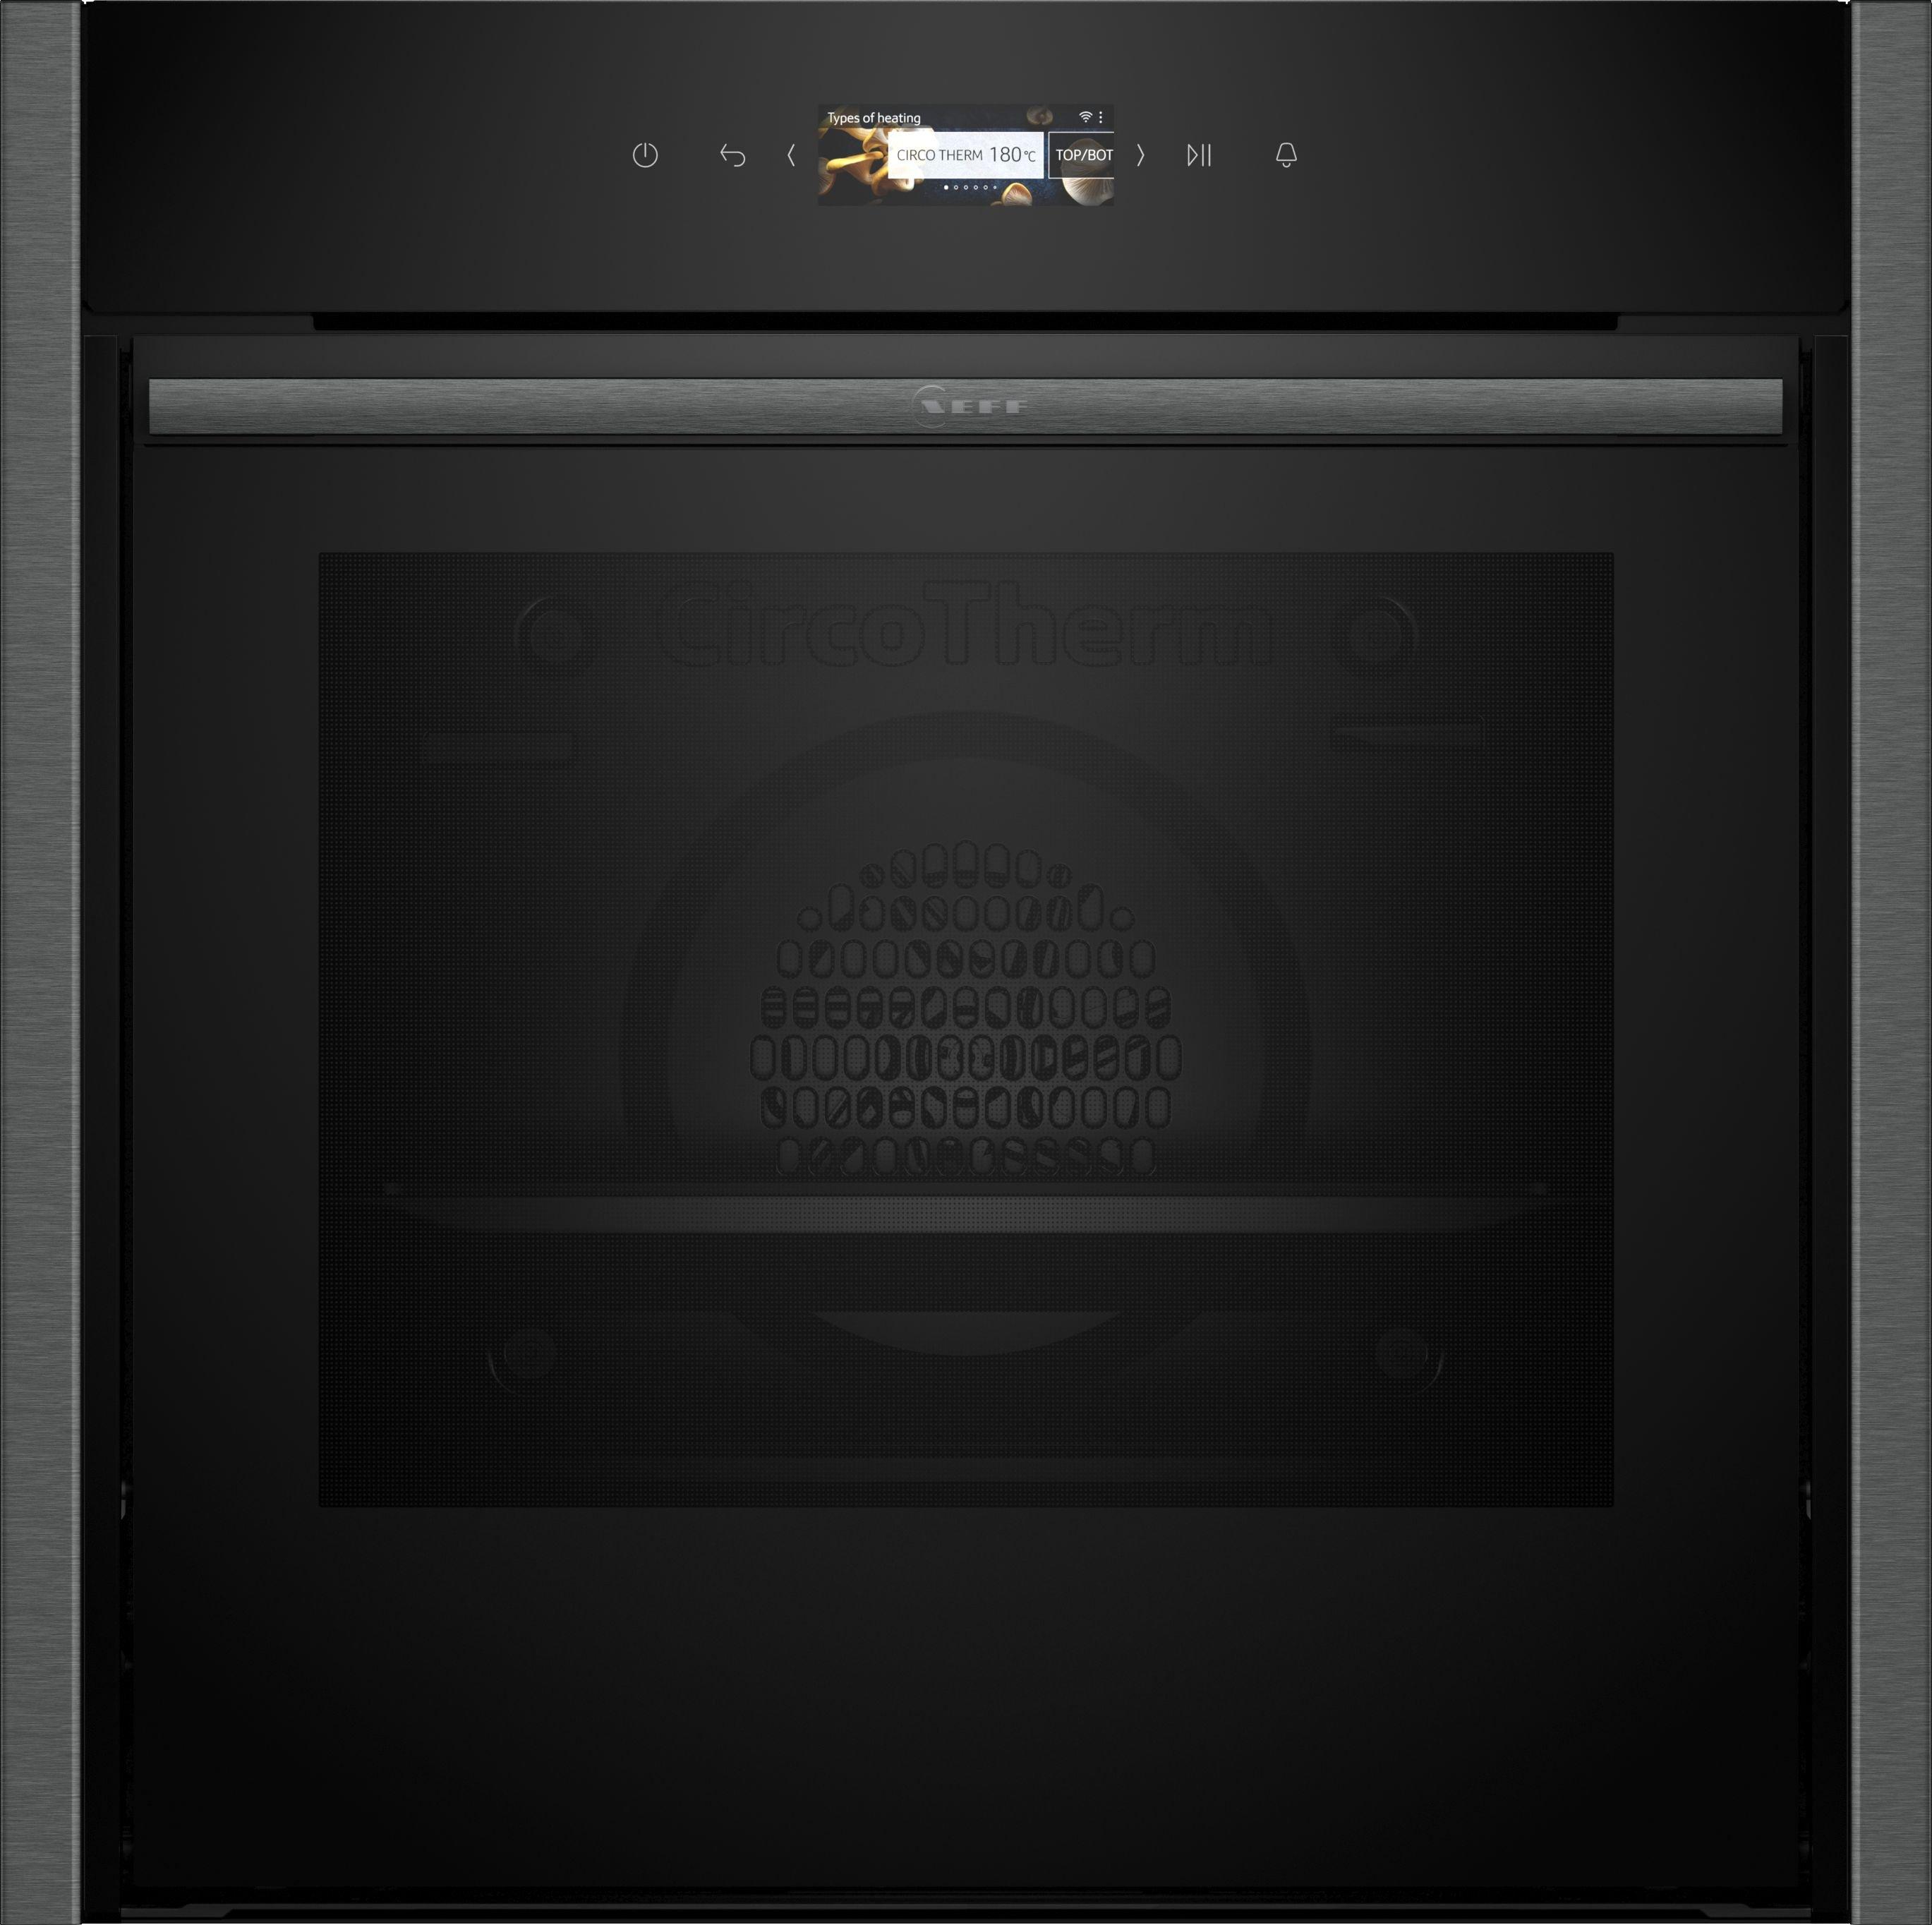 NEFF B54CR71G0B 60cm Slide and Hide Built In Electric Single Oven